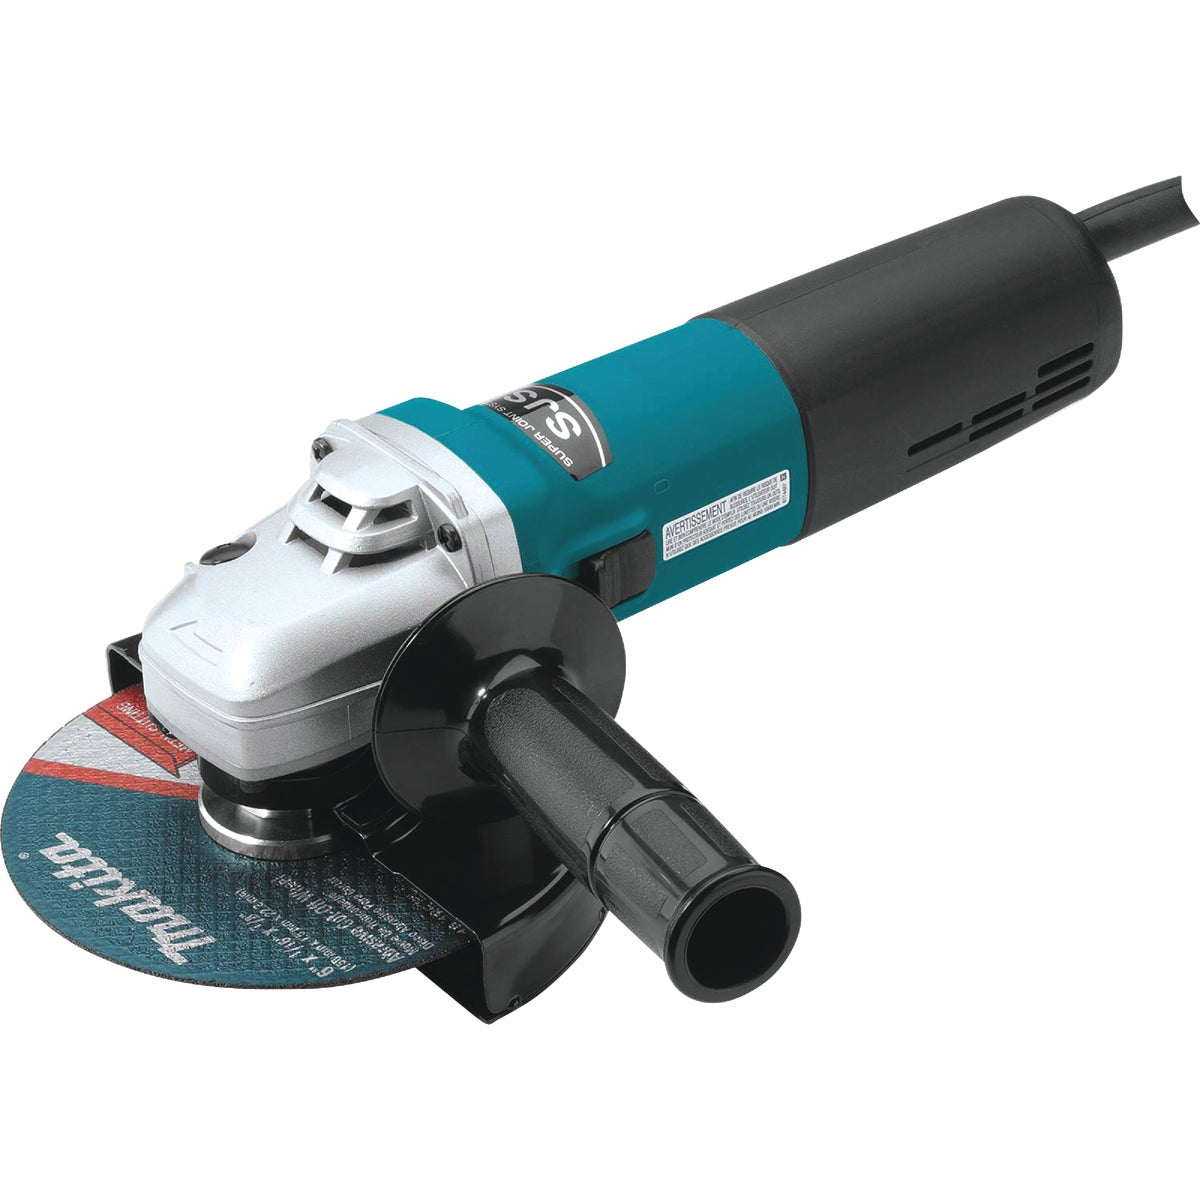 Makita 6 In. 13-Amp SJS High-Power Angle Grinder with Lock On